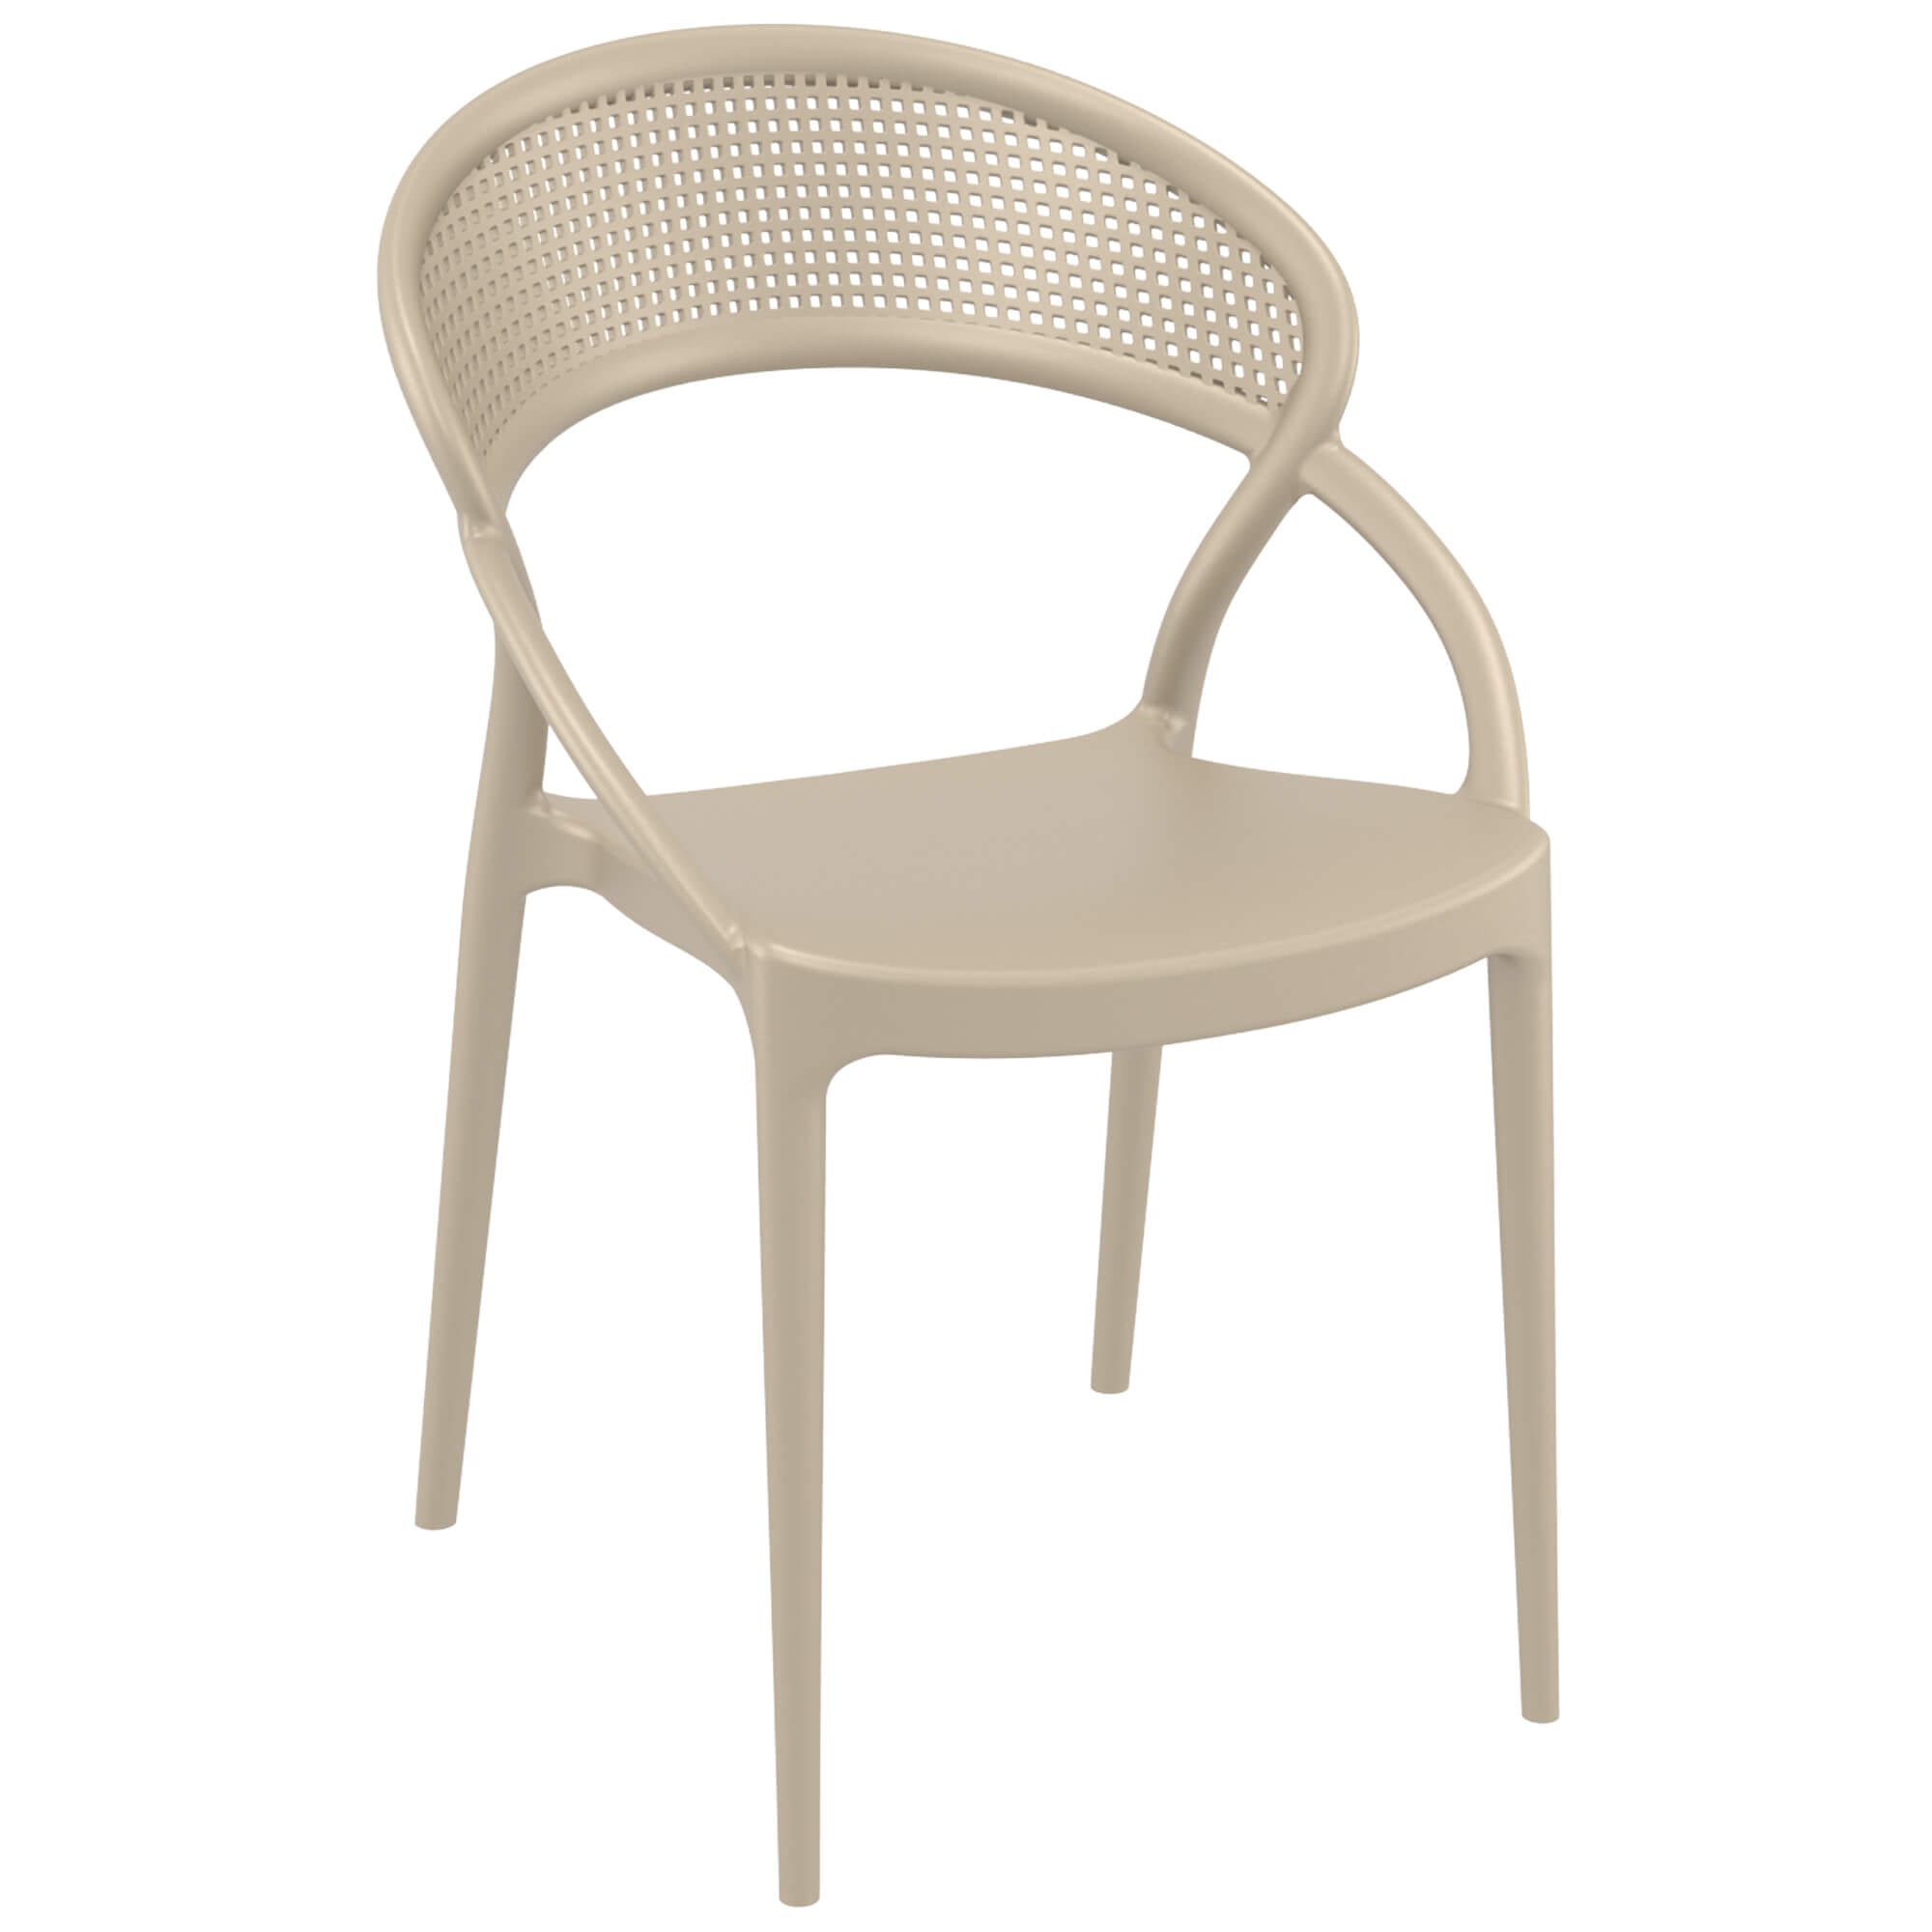 Untep Chair - Taupe